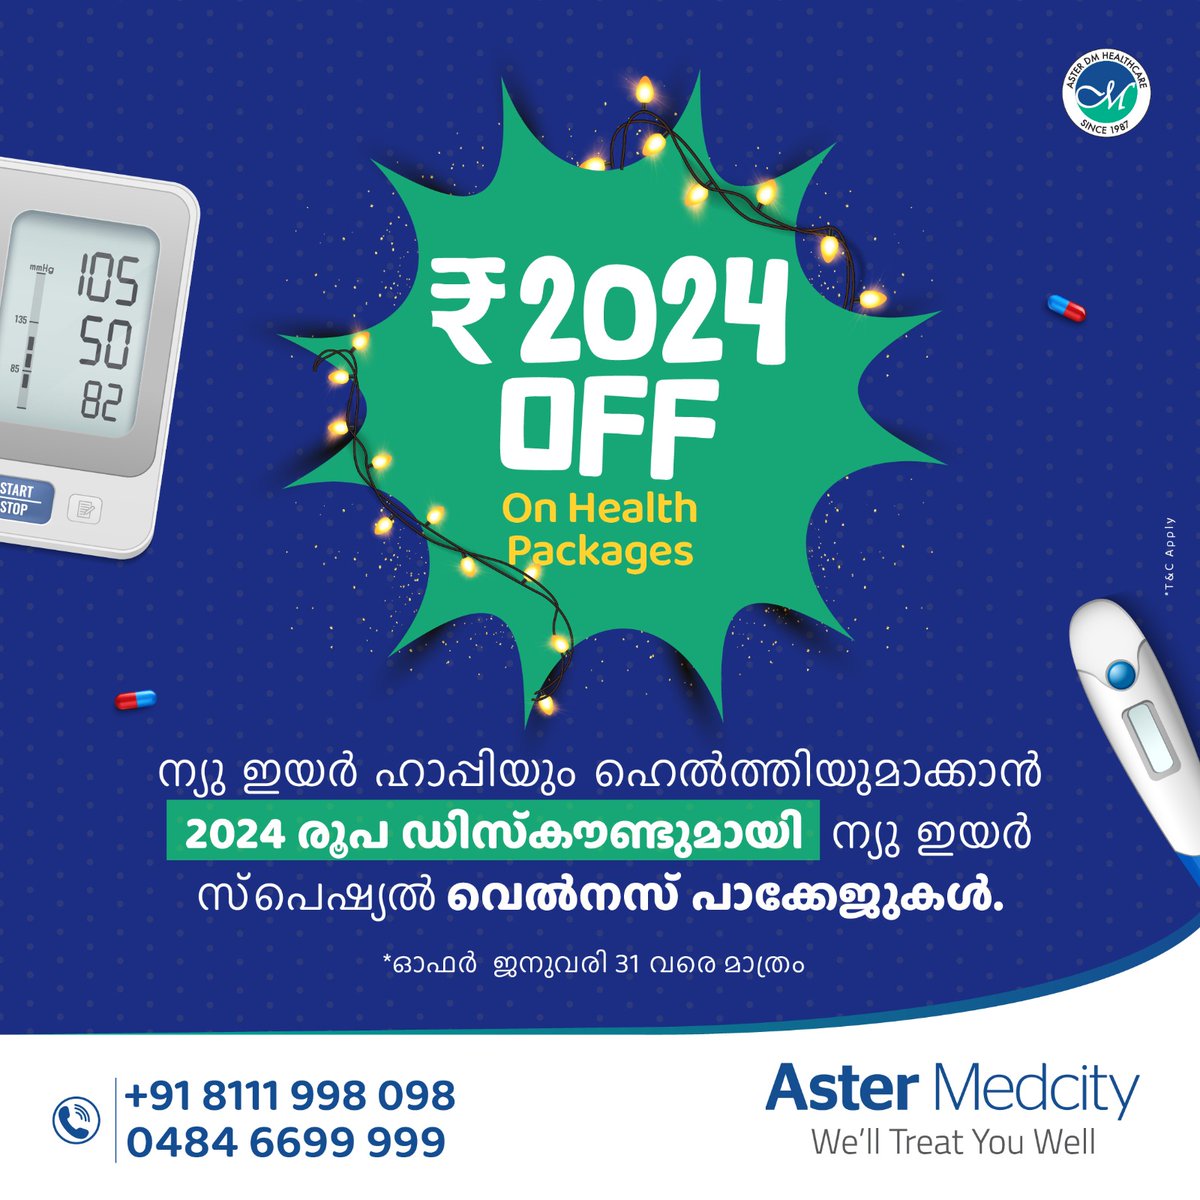 🌟 Start your New Year on a healthy note with Aster Medcity! 🌟 Avail a special discount on comprehensive health checkup packages until January 31, 2024. Book your health checkup now 📲 8111998098 and embrace a healthier, happier you in 2024! 👉 asterhospitals.in/health-package…